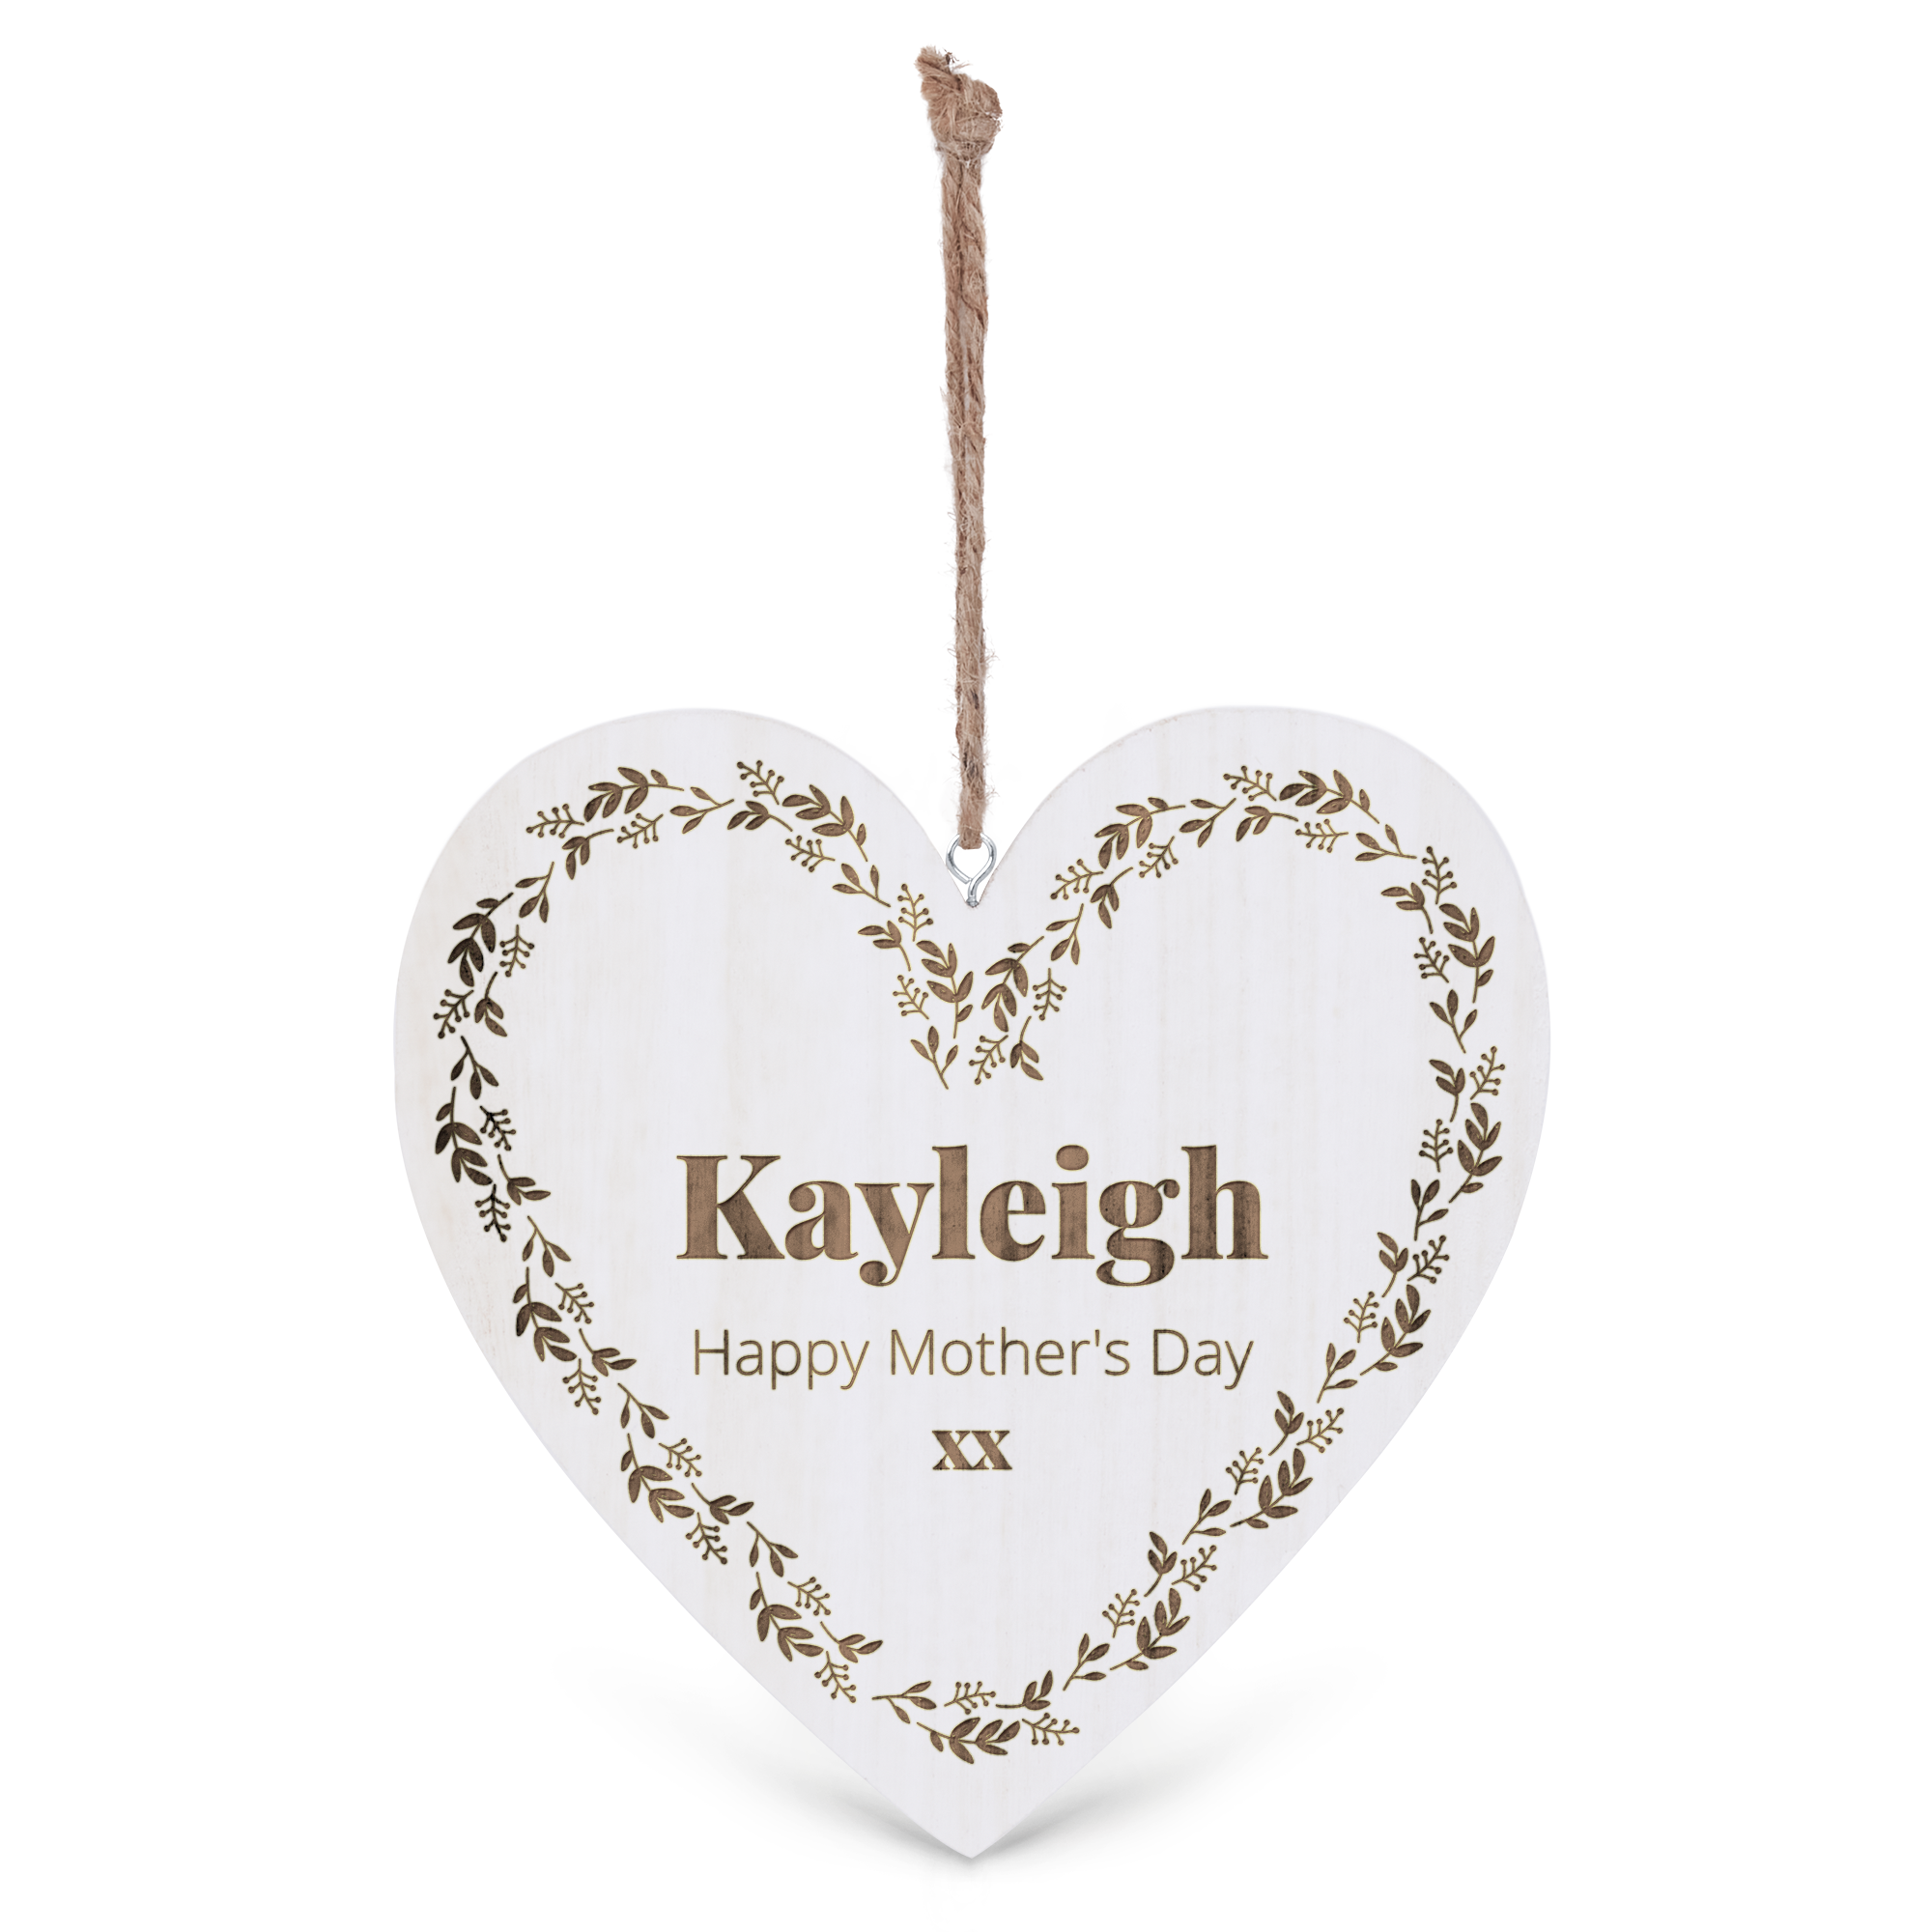 Personalised wooden heart decoration - Engraved